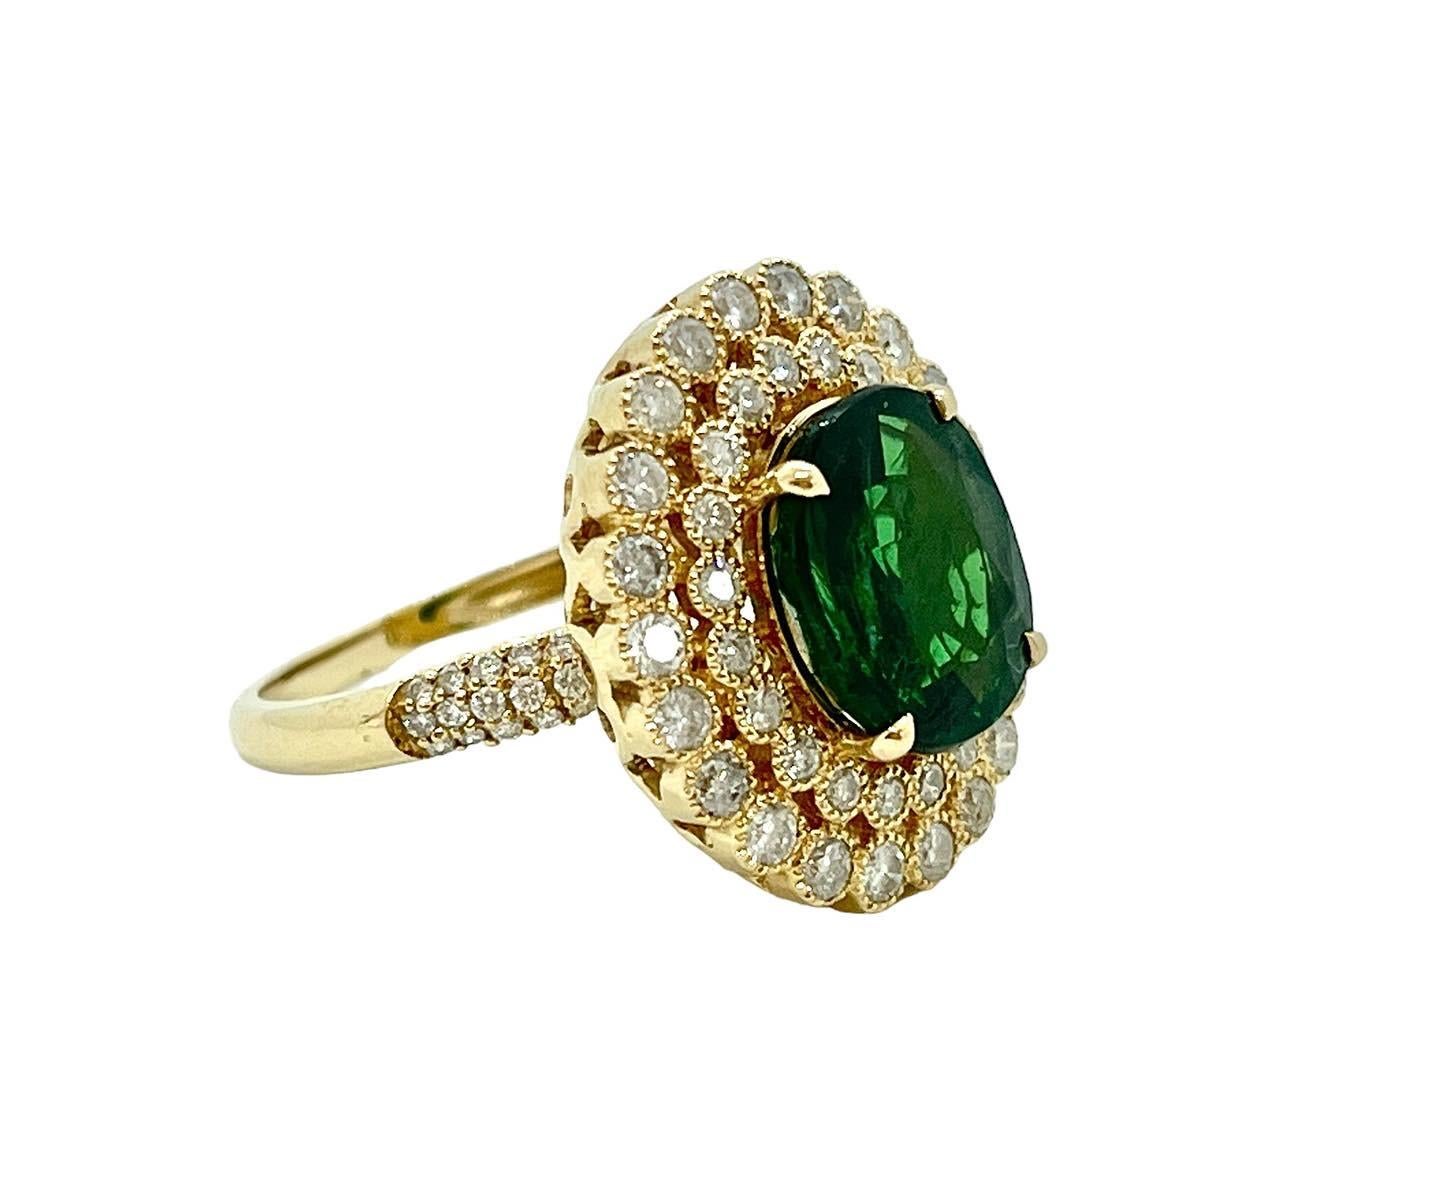 Take a Good Look at this Stunning Gemstone Ring 
You Won’t Find Another Like It!

The star of this piece is the large, 4.52ct Tsavorite Garnet.  Tsavorites of this size, colour and clarity is very rare and we are thrilled to have acquired it into